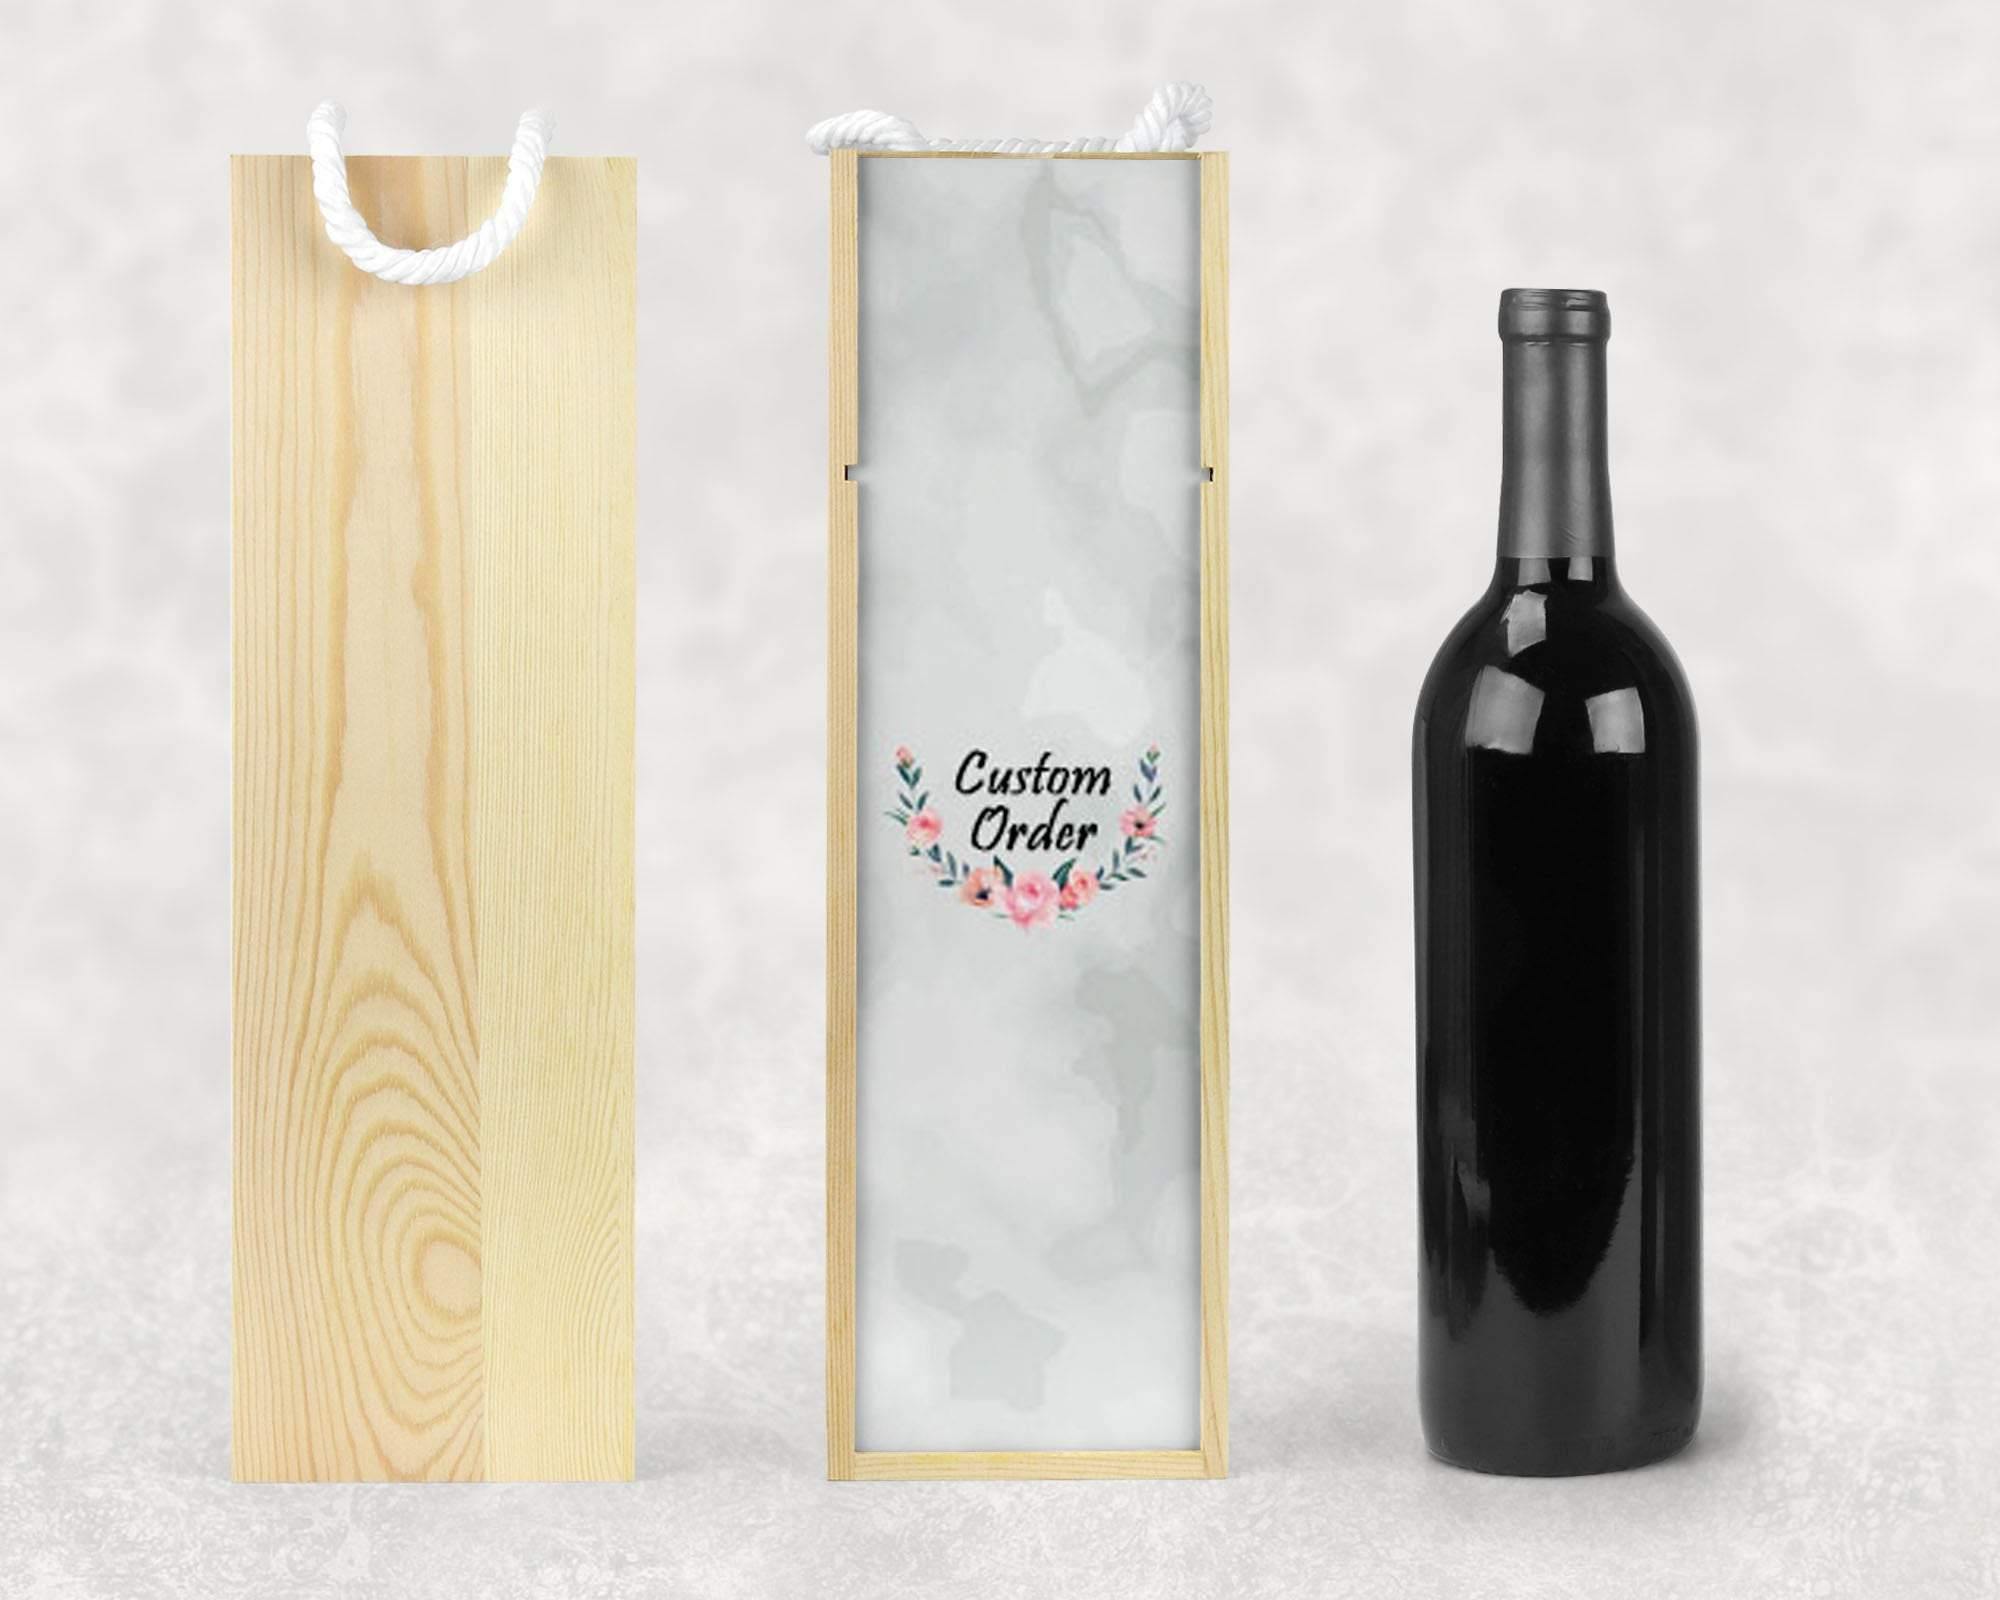 Personalized Wine Box | Custom Wine Gifts | Wine Storage | Custom Order - This & That Solutions - Personalized Wine Box | Custom Wine Gifts | Wine Storage | Custom Order - Personalized Gifts & Custom Home Decor